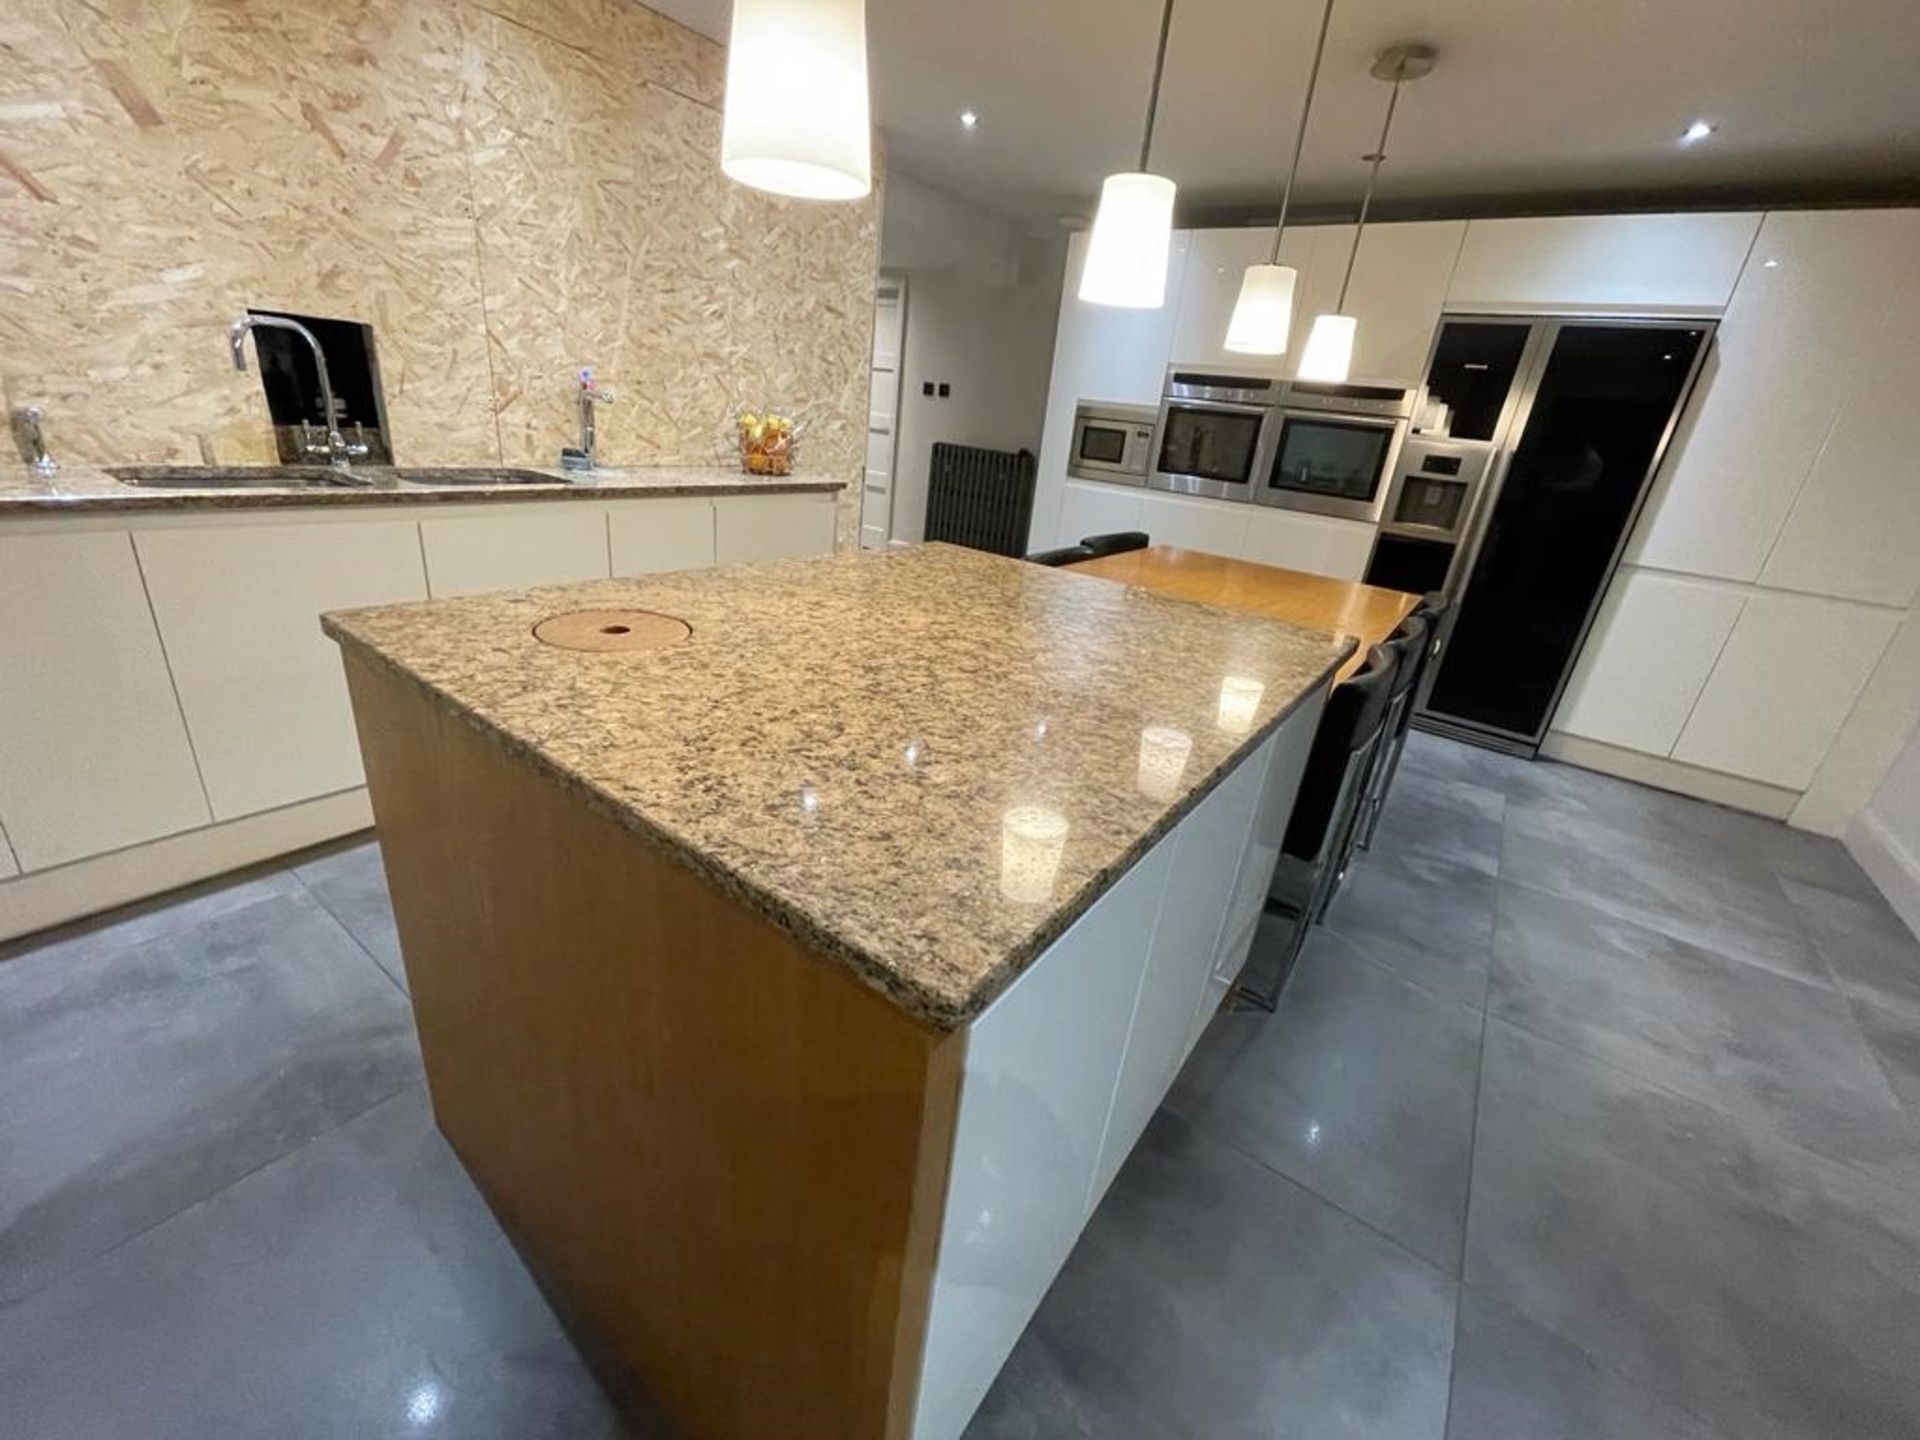 1 x Stunning PARAPAN Handleless Fitted Kitchen with Neff Appliances, Granite Worktops & Island - Image 23 of 126